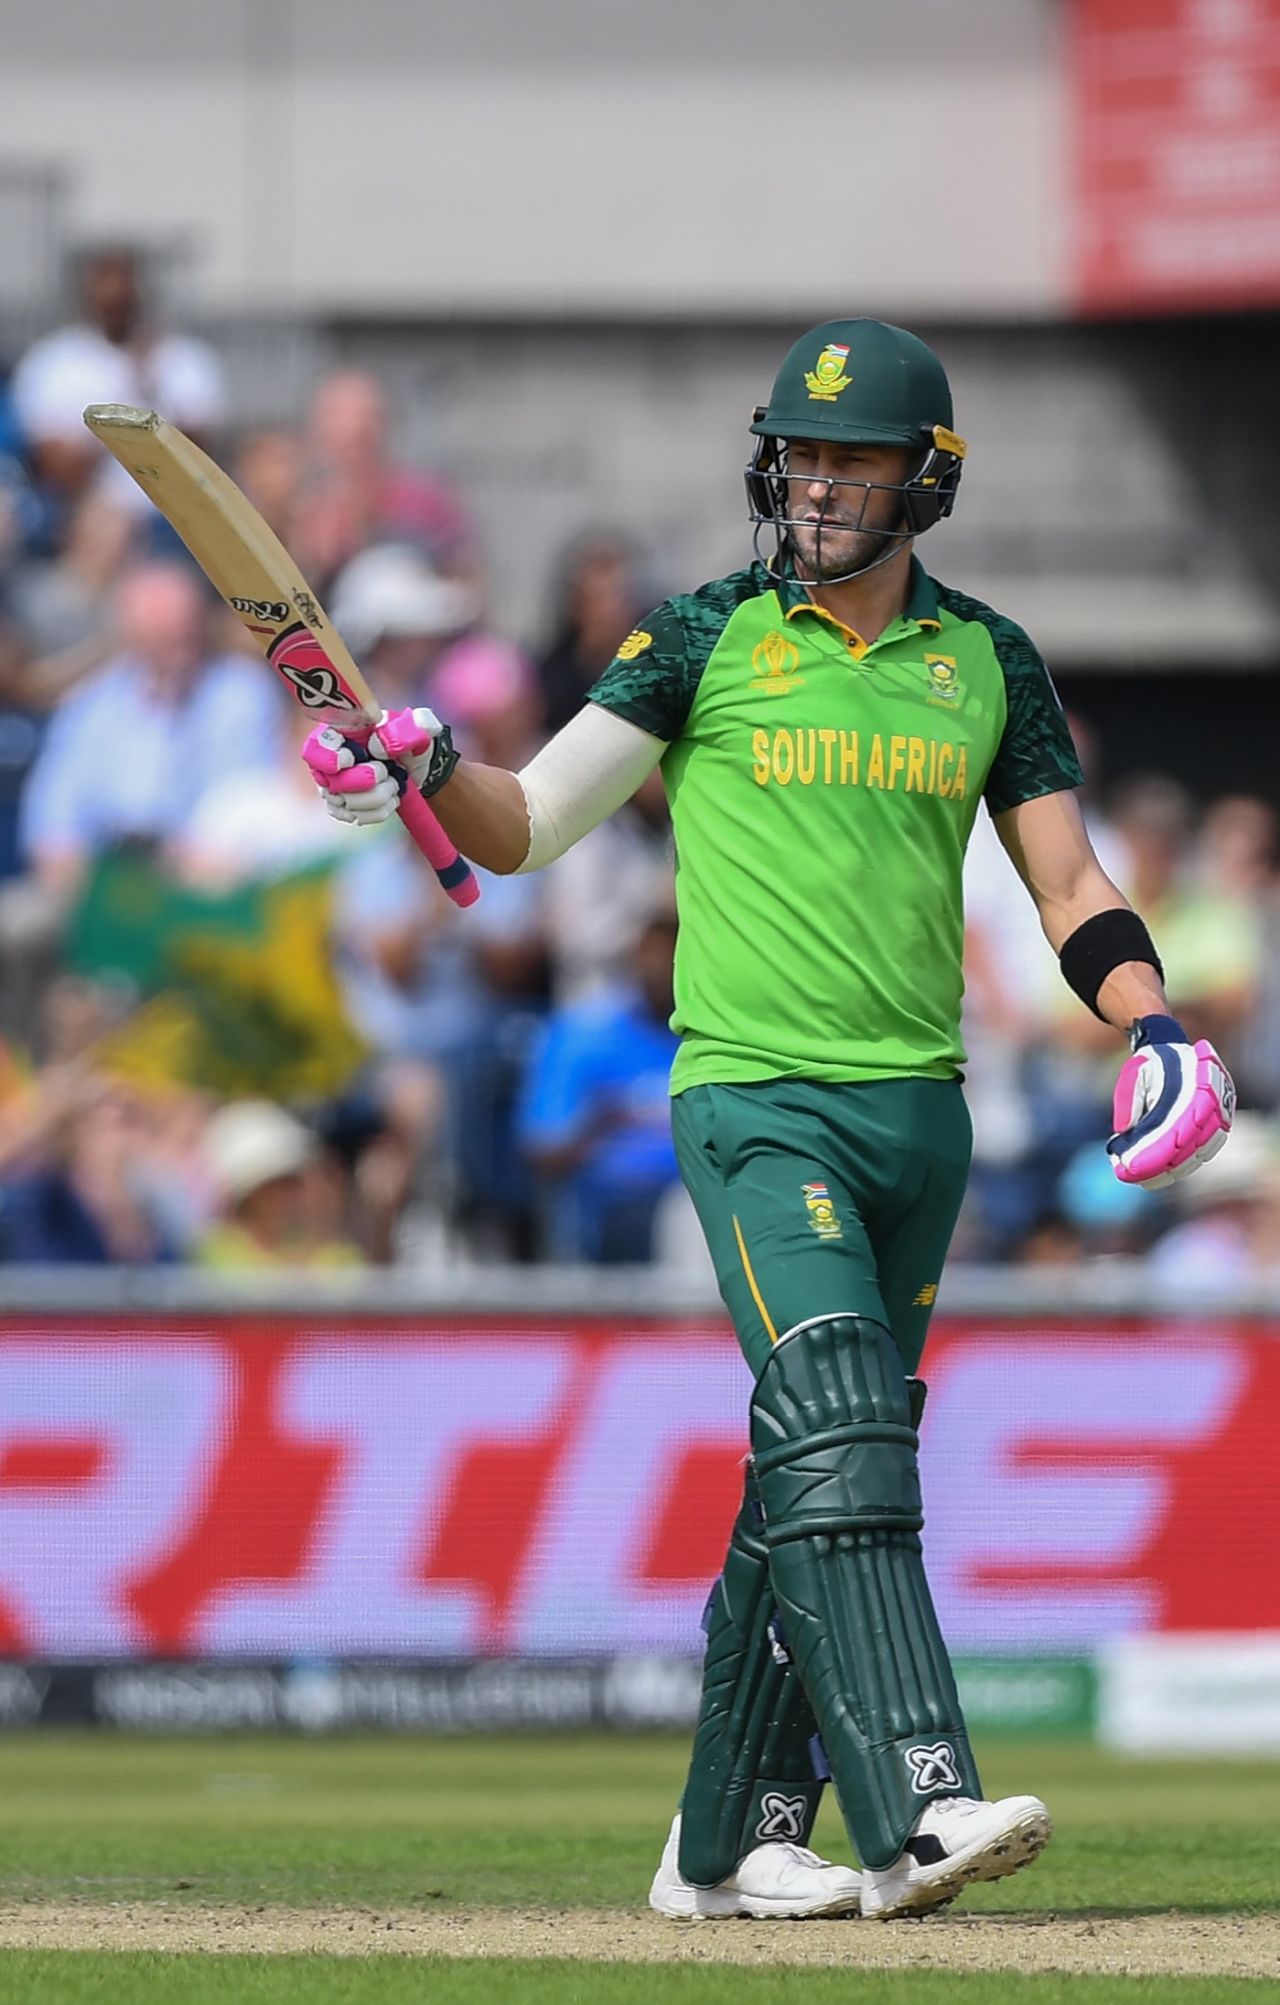 Faf du Plessis acknowledges the applause, Australia v South Africa, World Cup 2019, Old Trafford, July 6, 2019